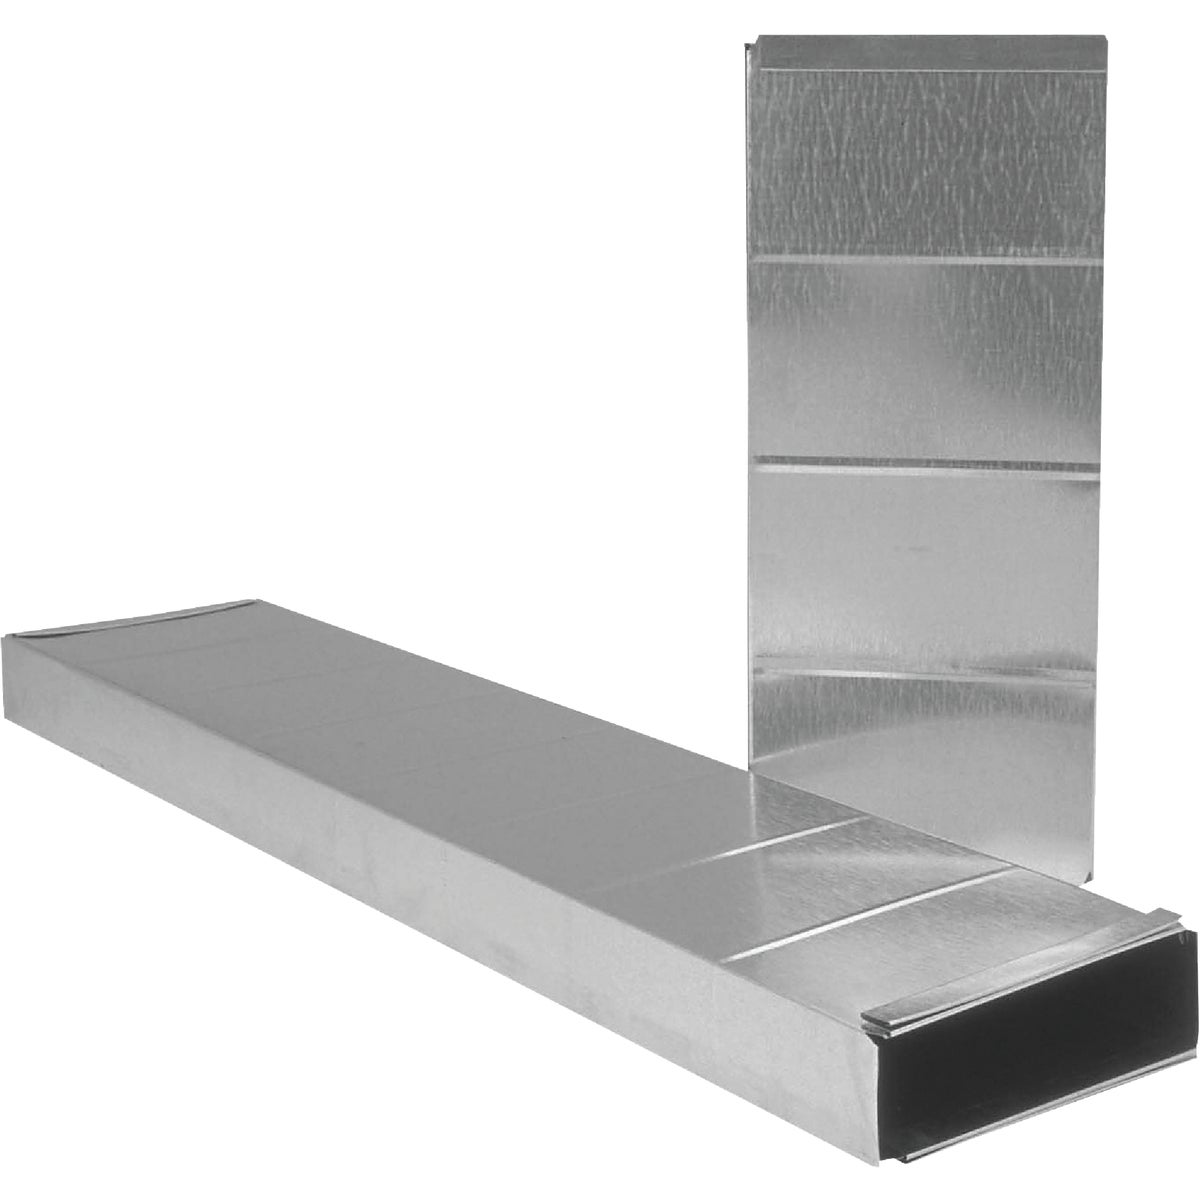 Imperial 30 Ga. 2-1/4 In. x 12 In. x 24 In. Galvanized Stack Duct